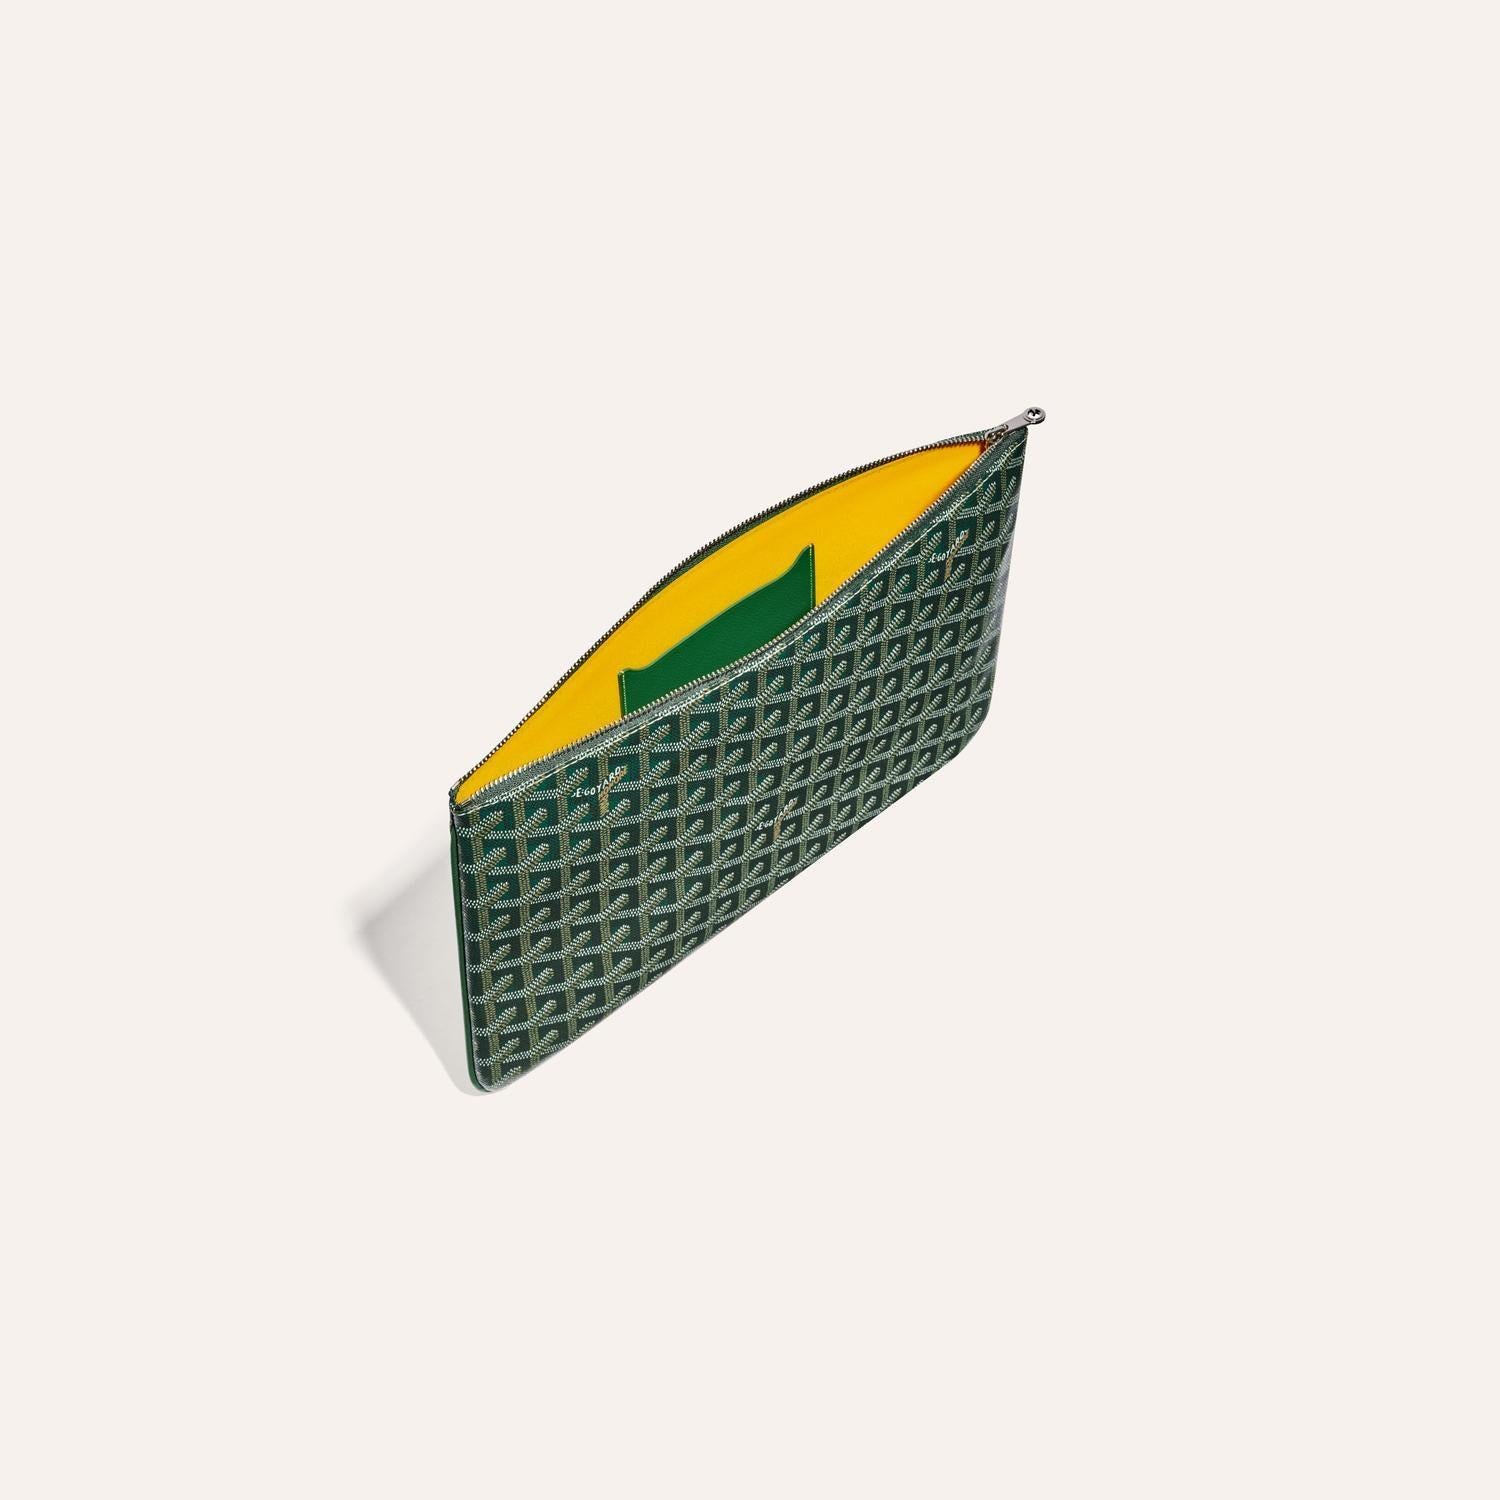 Goyard's Bag dont have cardboard box, it will  be ship with dust bag and authenticity card
The Sénat MM pouch can be used as an interior design element to organize the contents of your bag or as an everyday pouch. It guarantees safety thanks to its